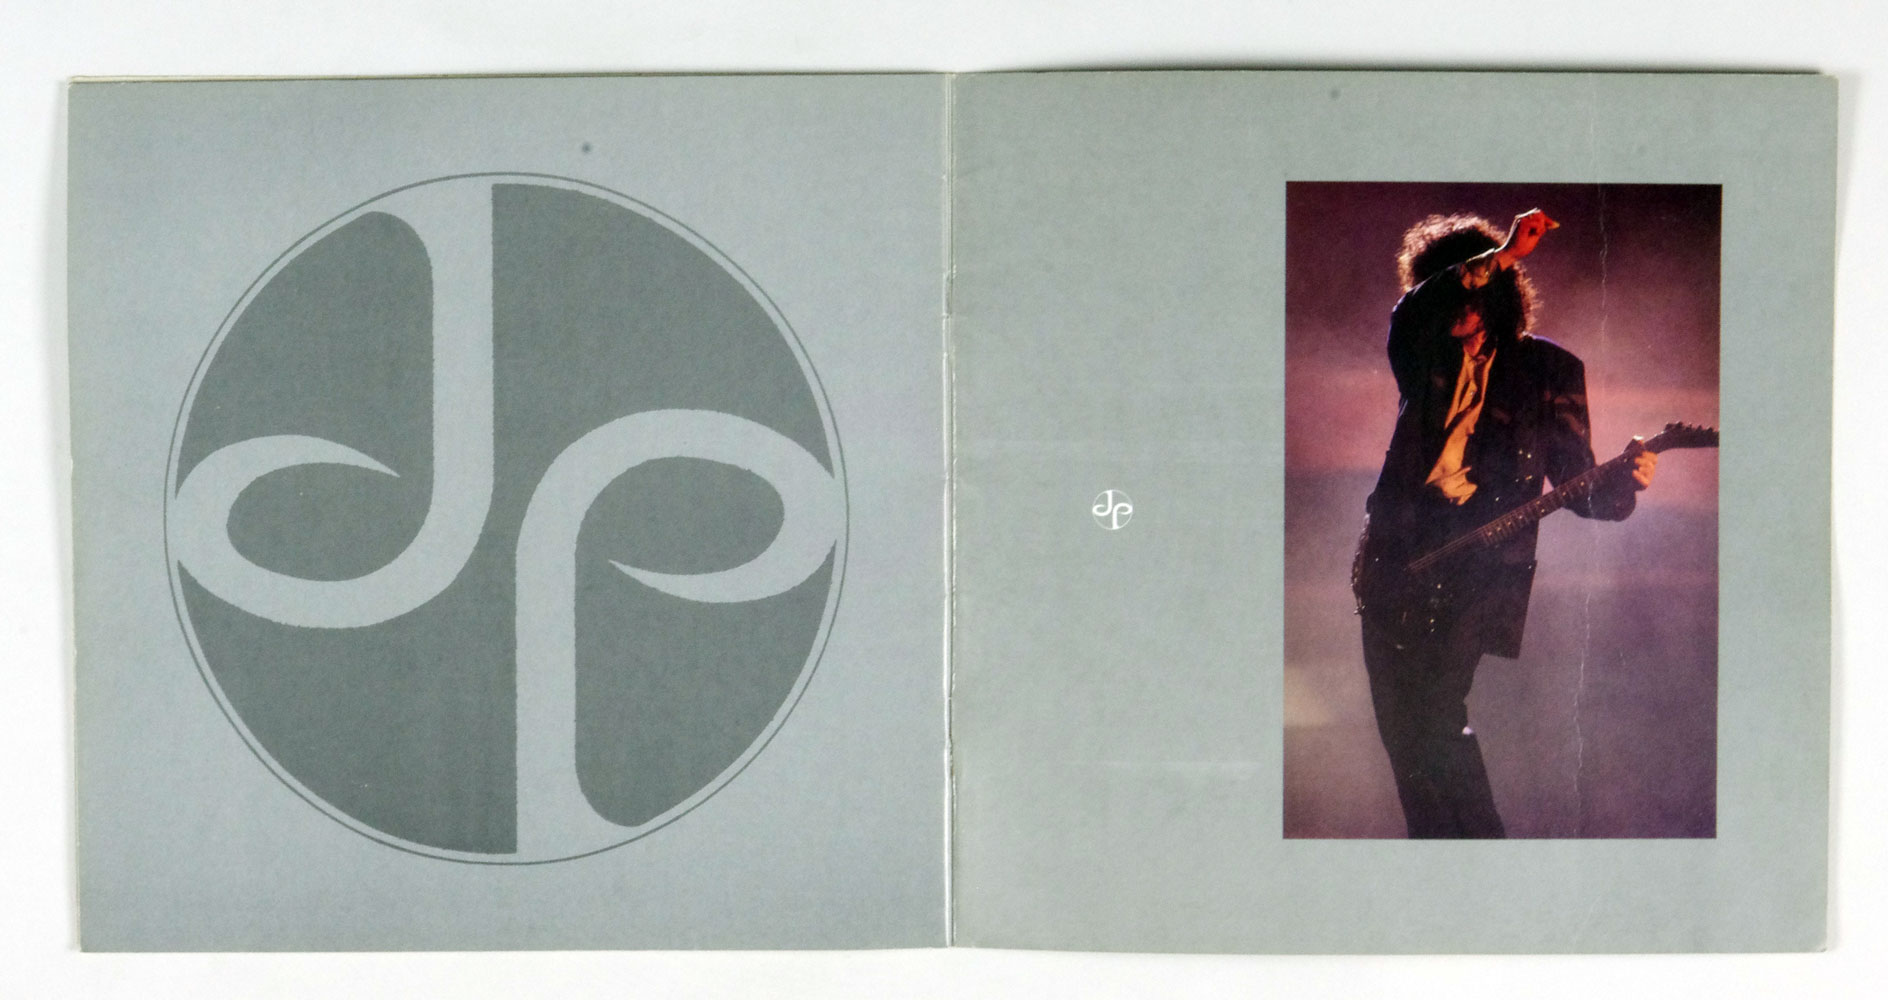 Jimmy Page 1988 OUTRIDER Tour Program Book